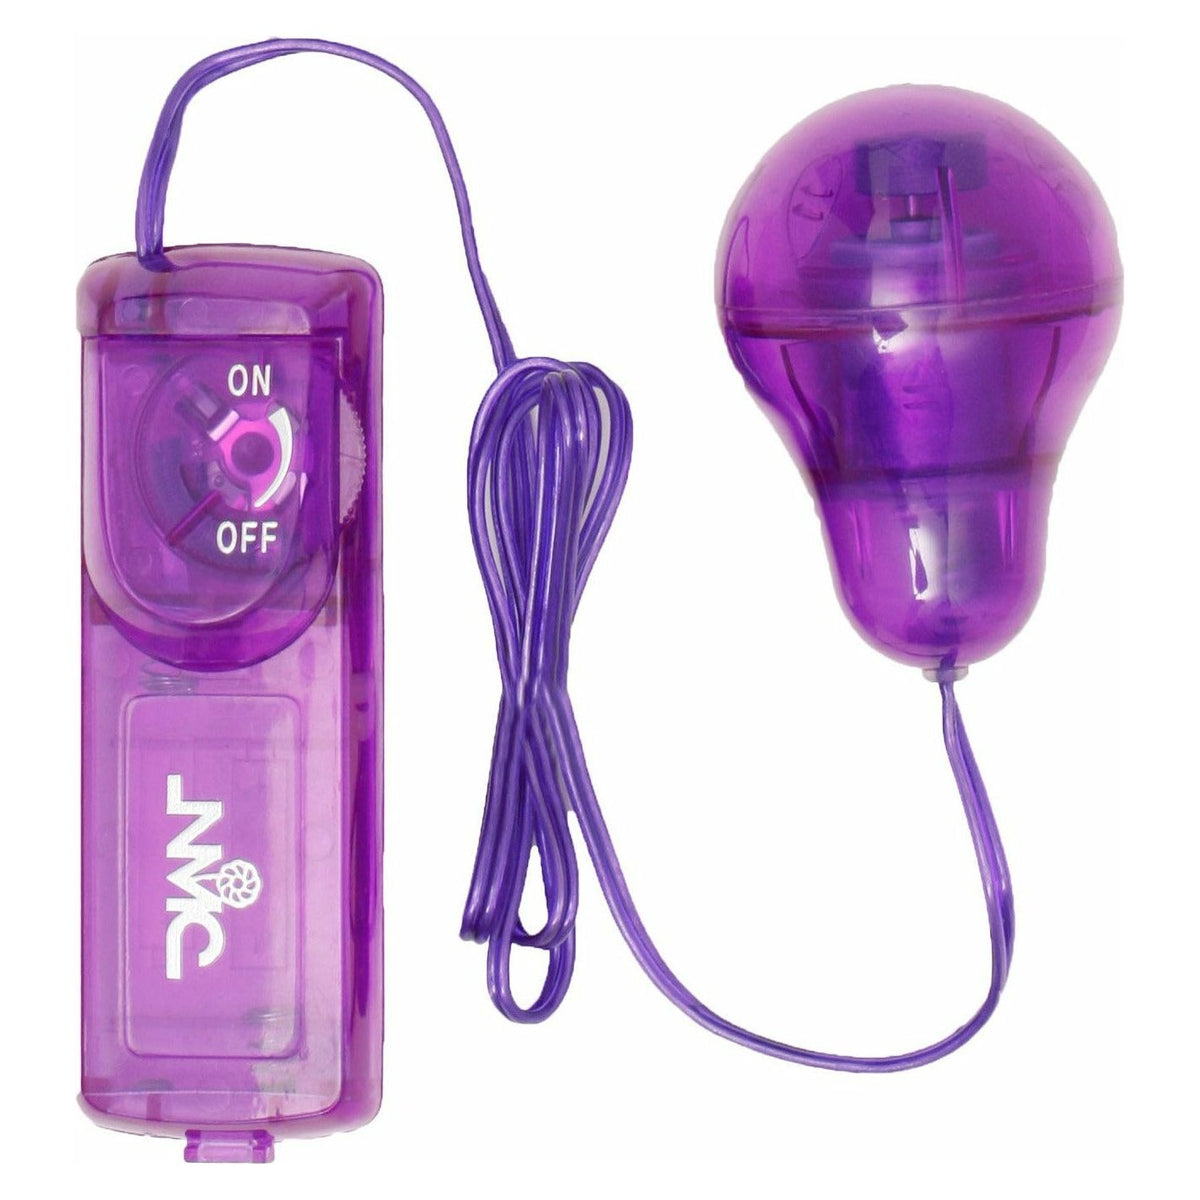 NMC Gyrating Motion - Juzy - Vibrating Egg with Remote - Purple